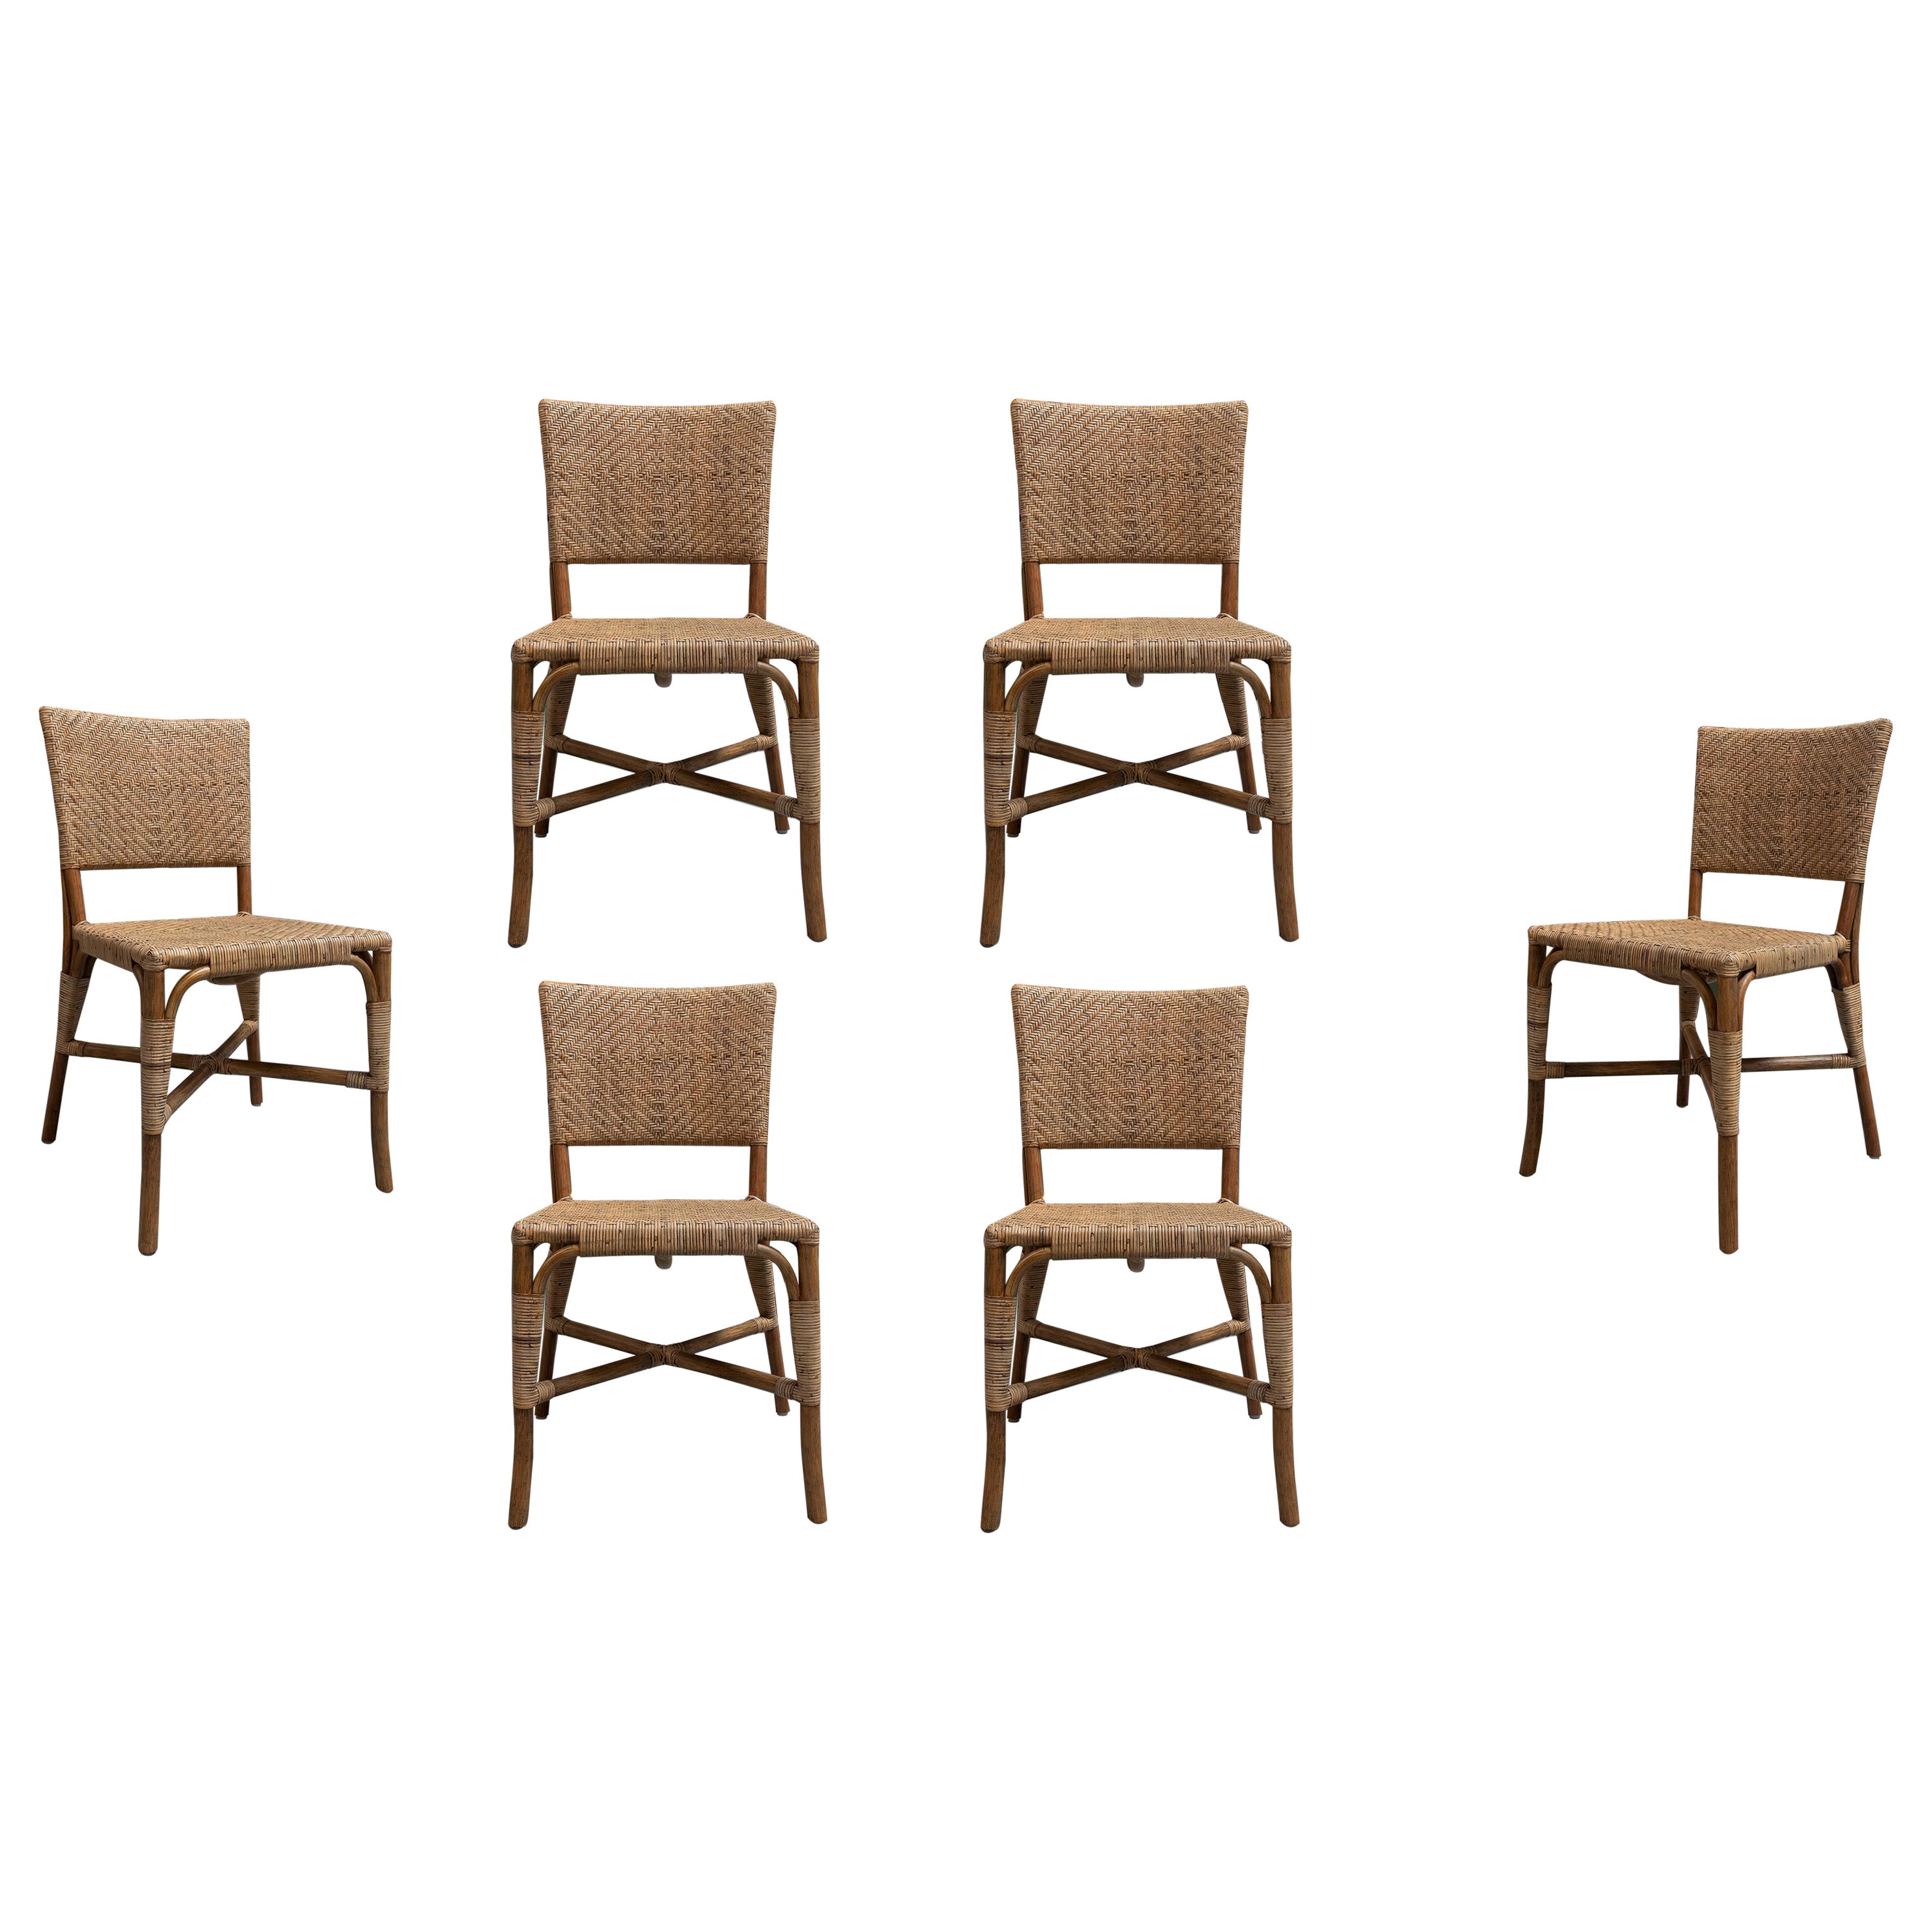 Set of 6 Spanish Modern Bamboo & Hand Woven Wicker Chairs For Sale